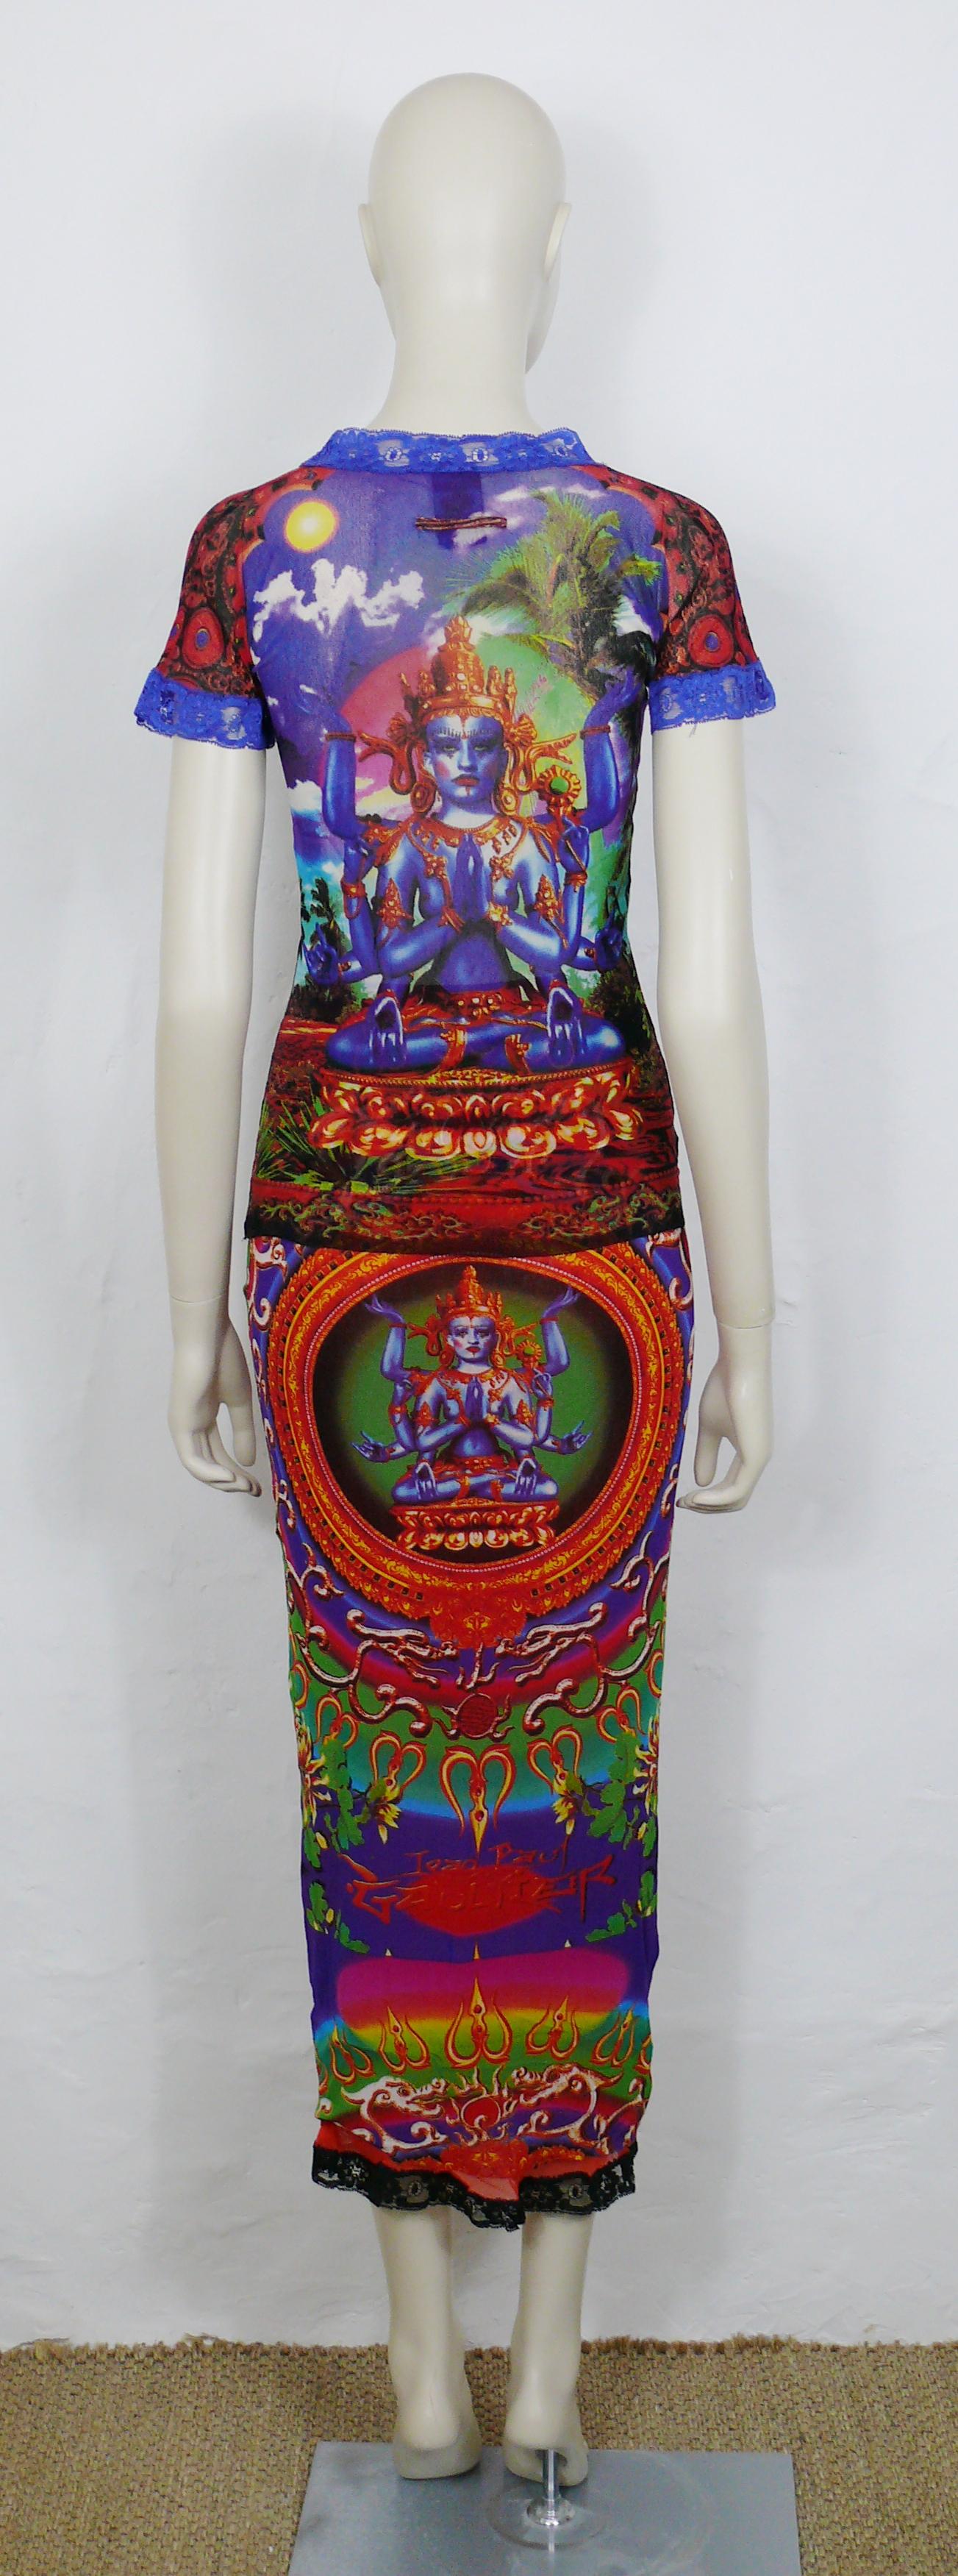 Jean Paul Gaultier Vintage Hindu Deity Sheer Mesh Skirt and Top Ensemble In Good Condition For Sale In Nice, FR